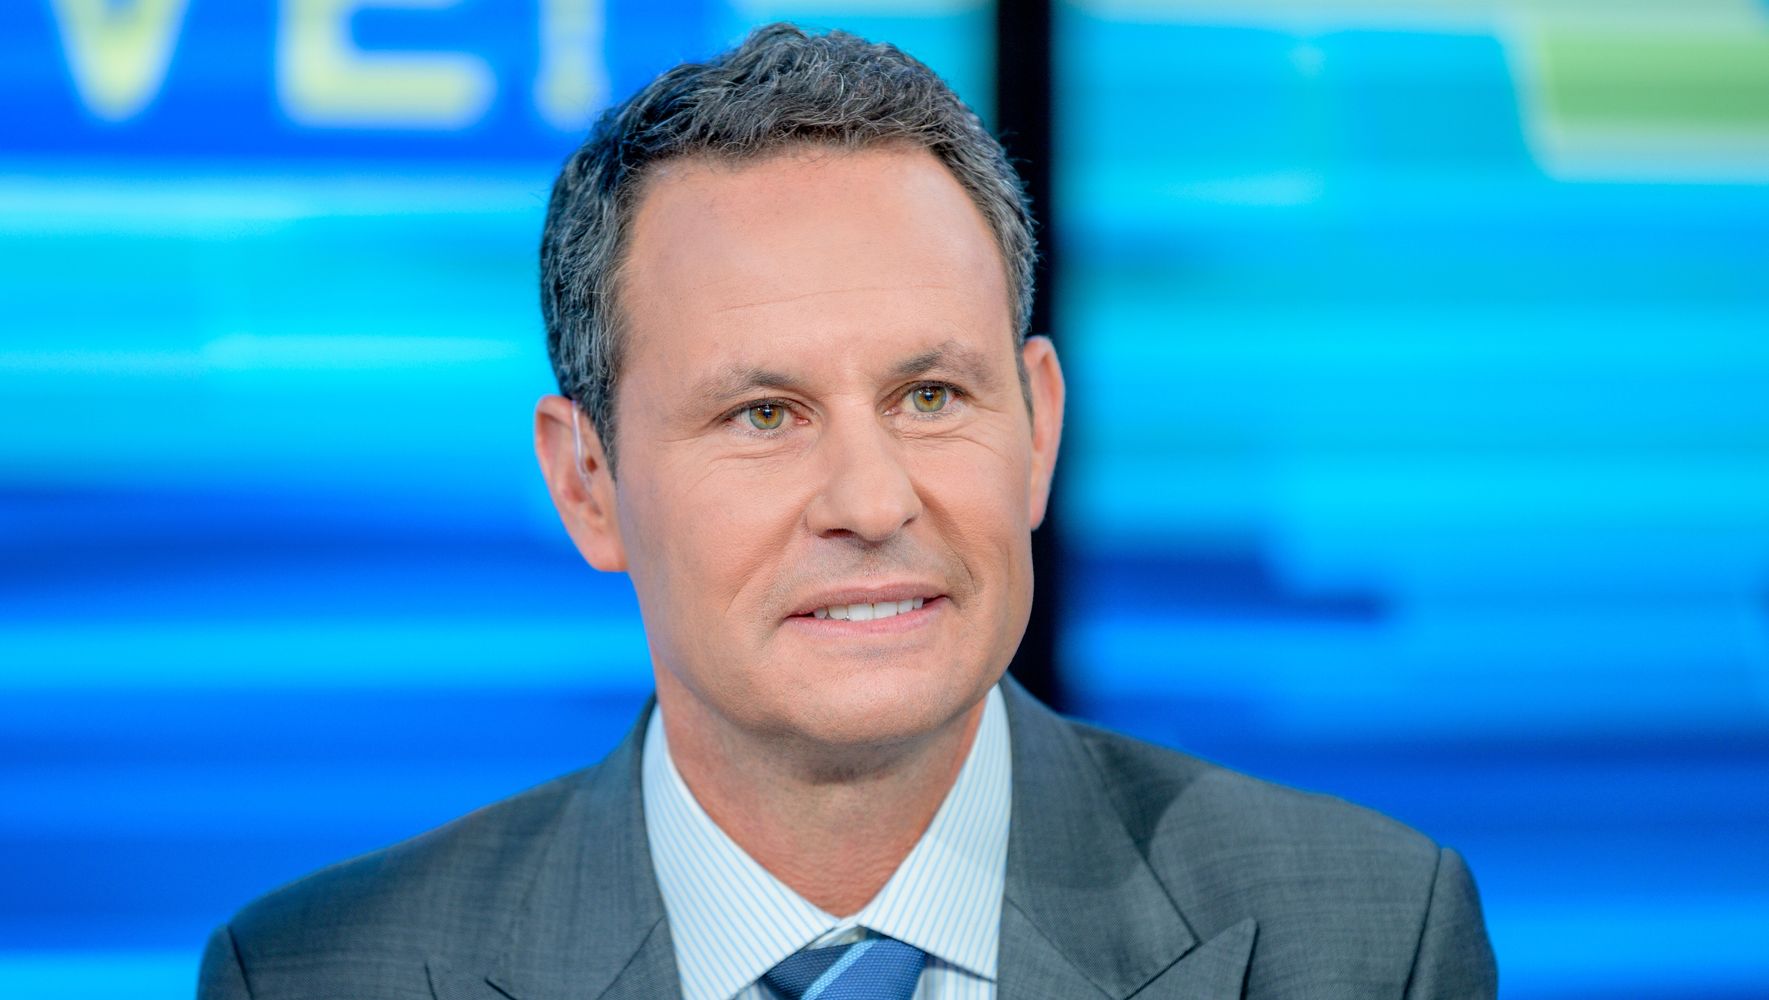 'Fox & Friends' Co-Host Says Vaccine Opponents Have Right To Choose Death